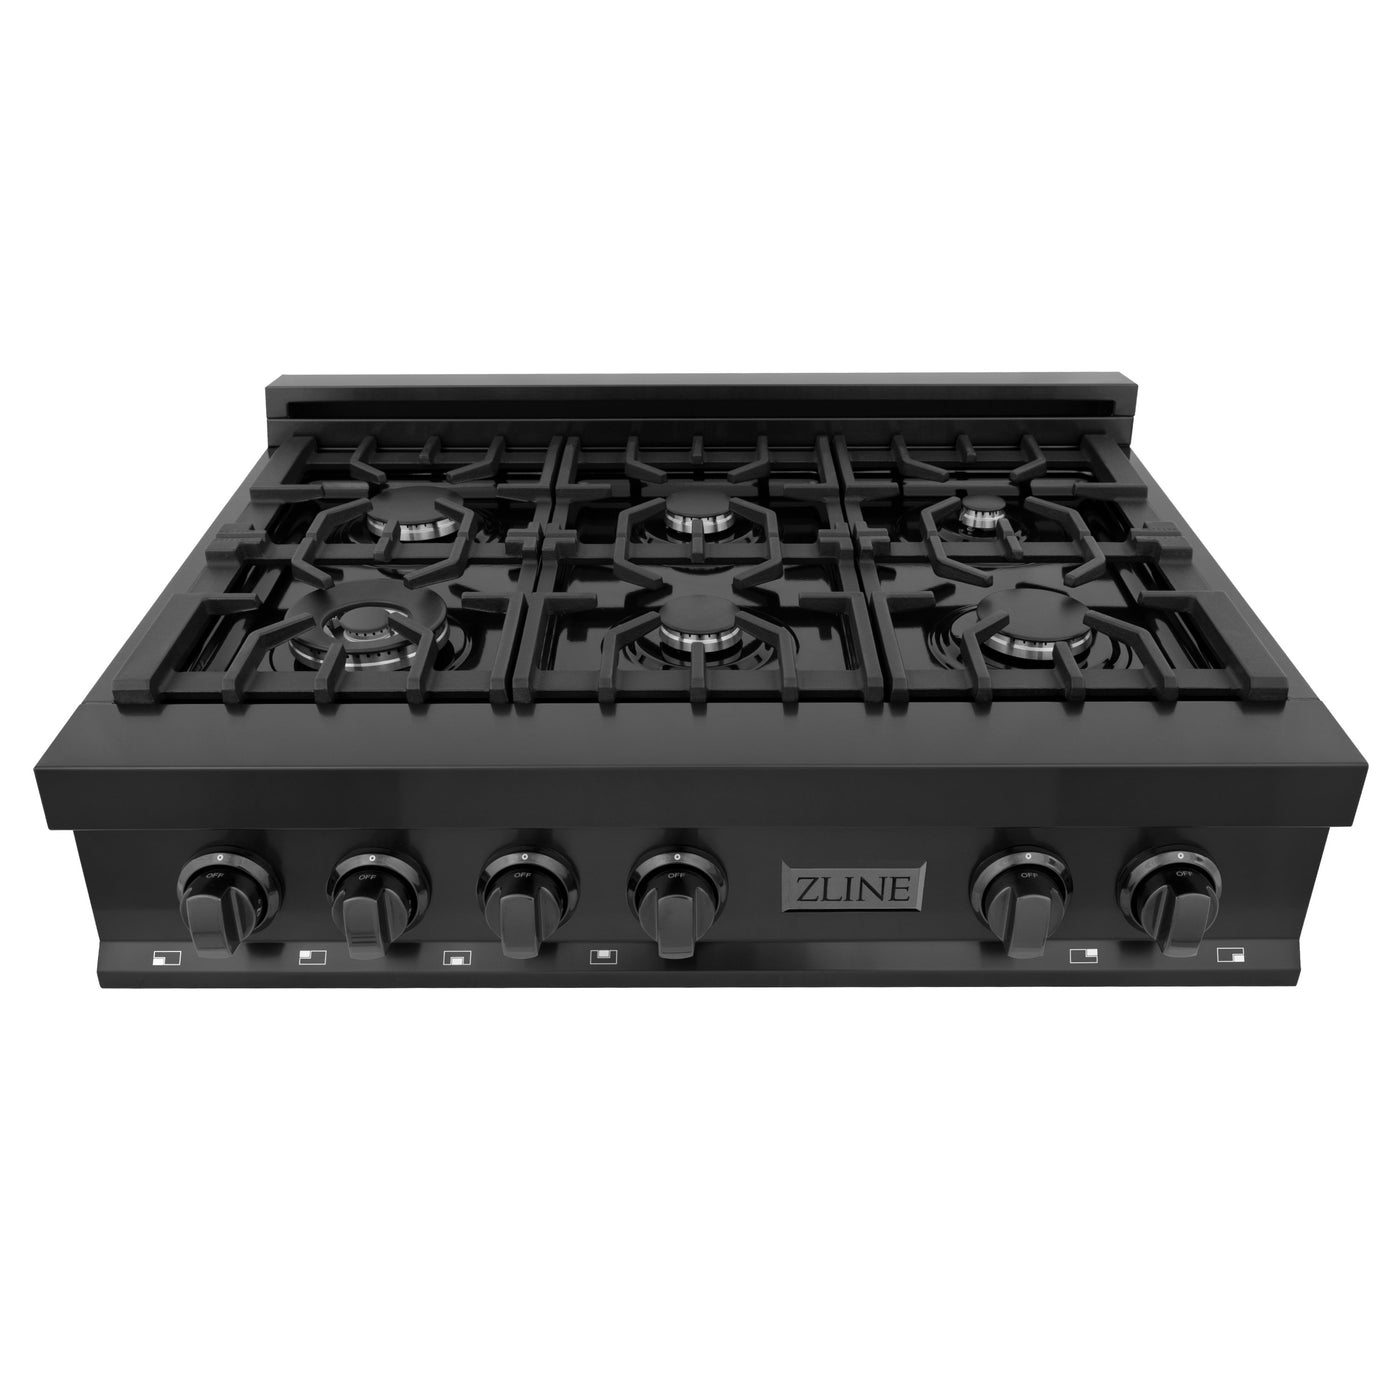 ZLINE 36" Porcelain Gas Stovetop in Black Stainless Steel with 6 Gas Burners (RTB-BR-36)